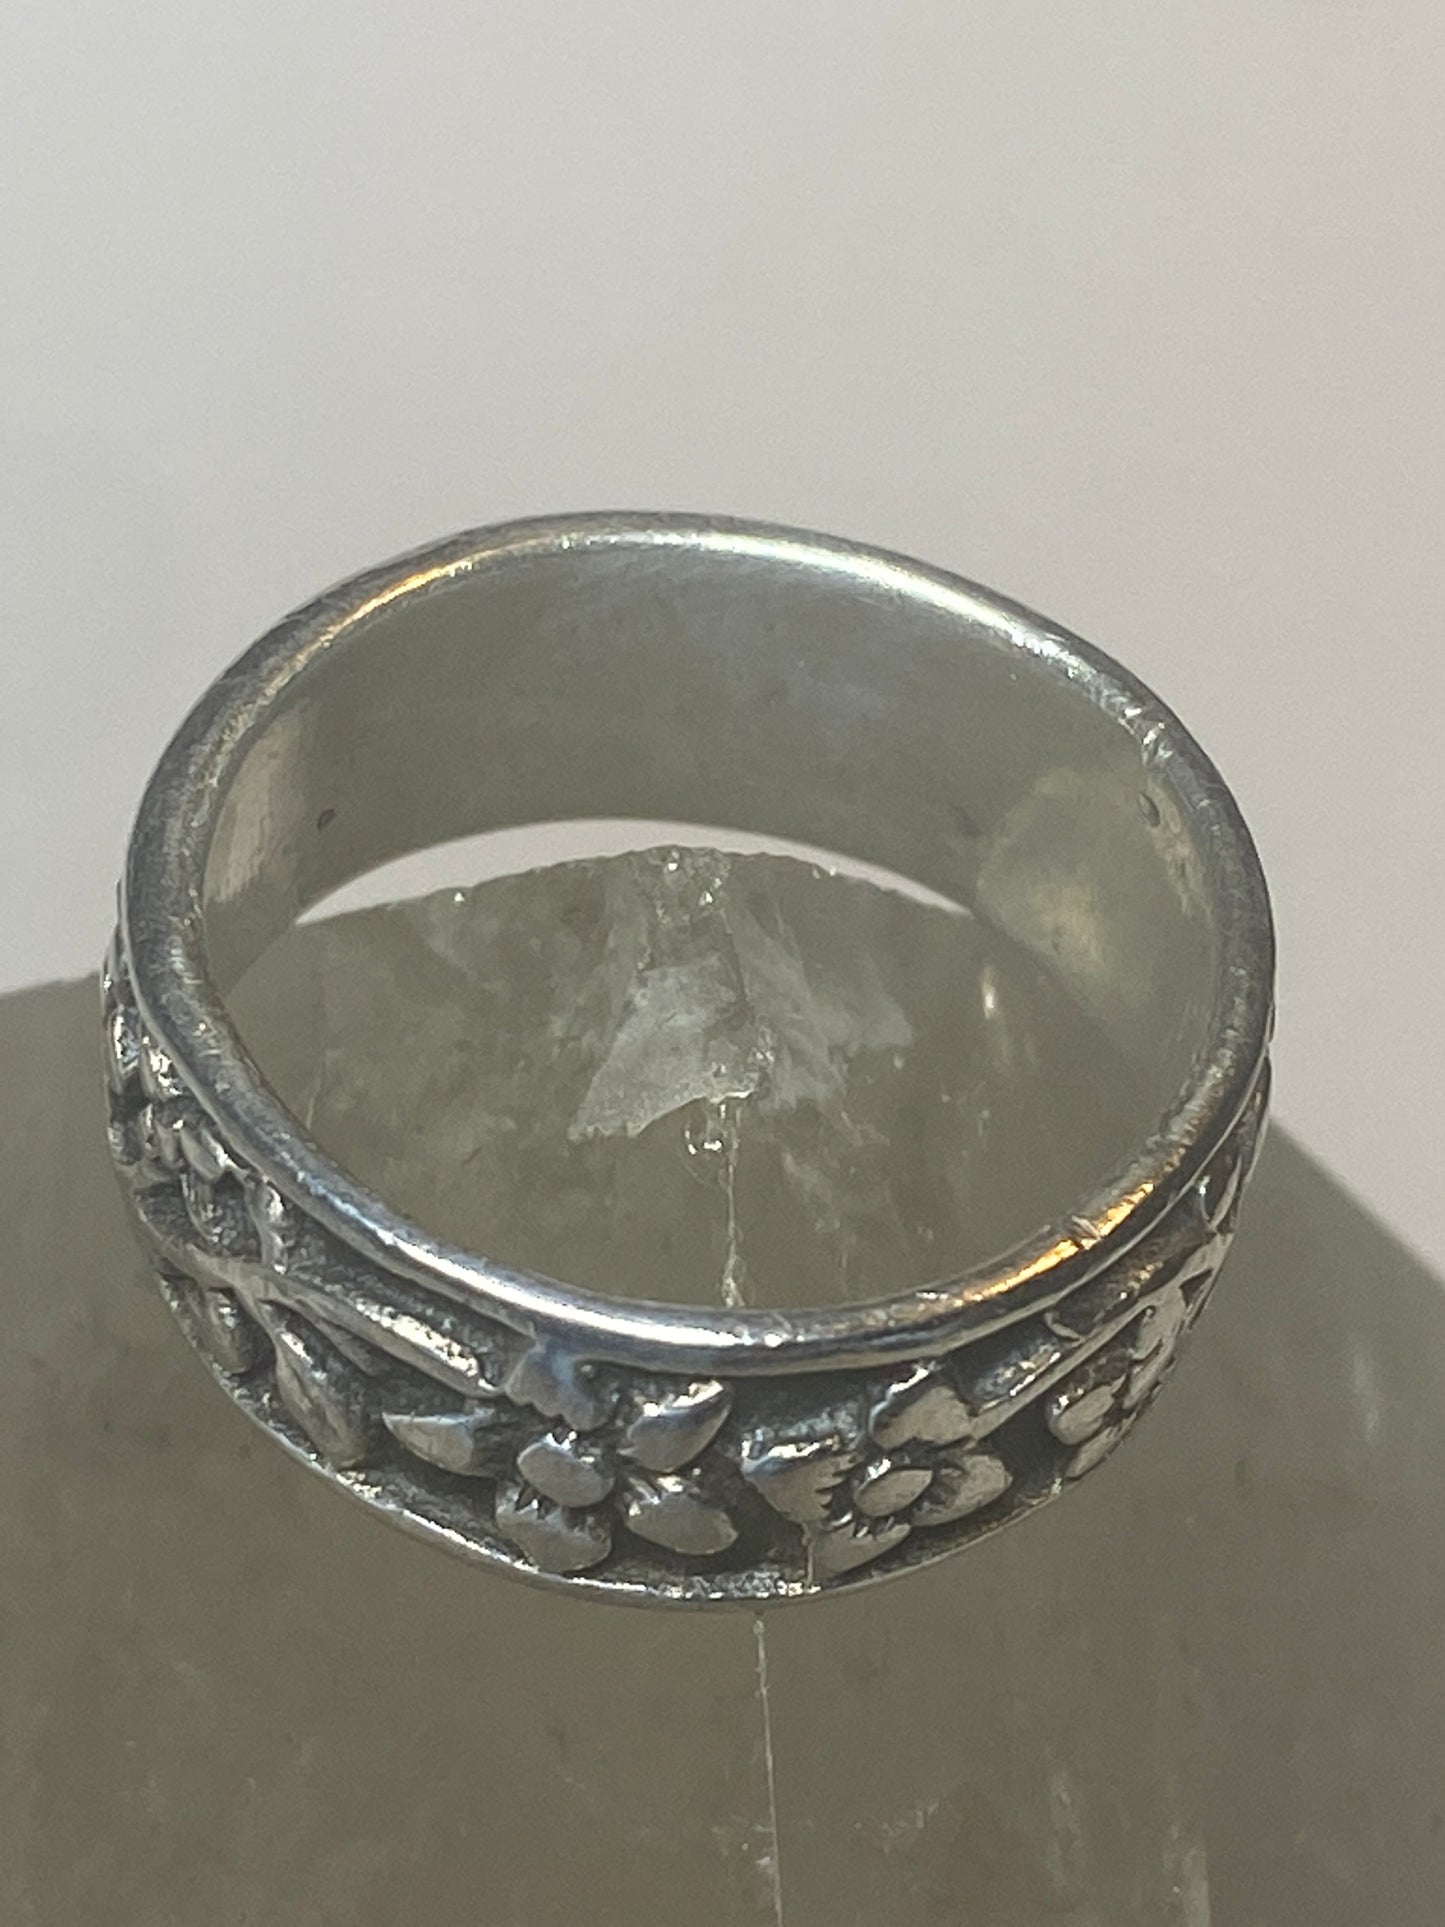 Floral ring flowers band sterling silver women girl